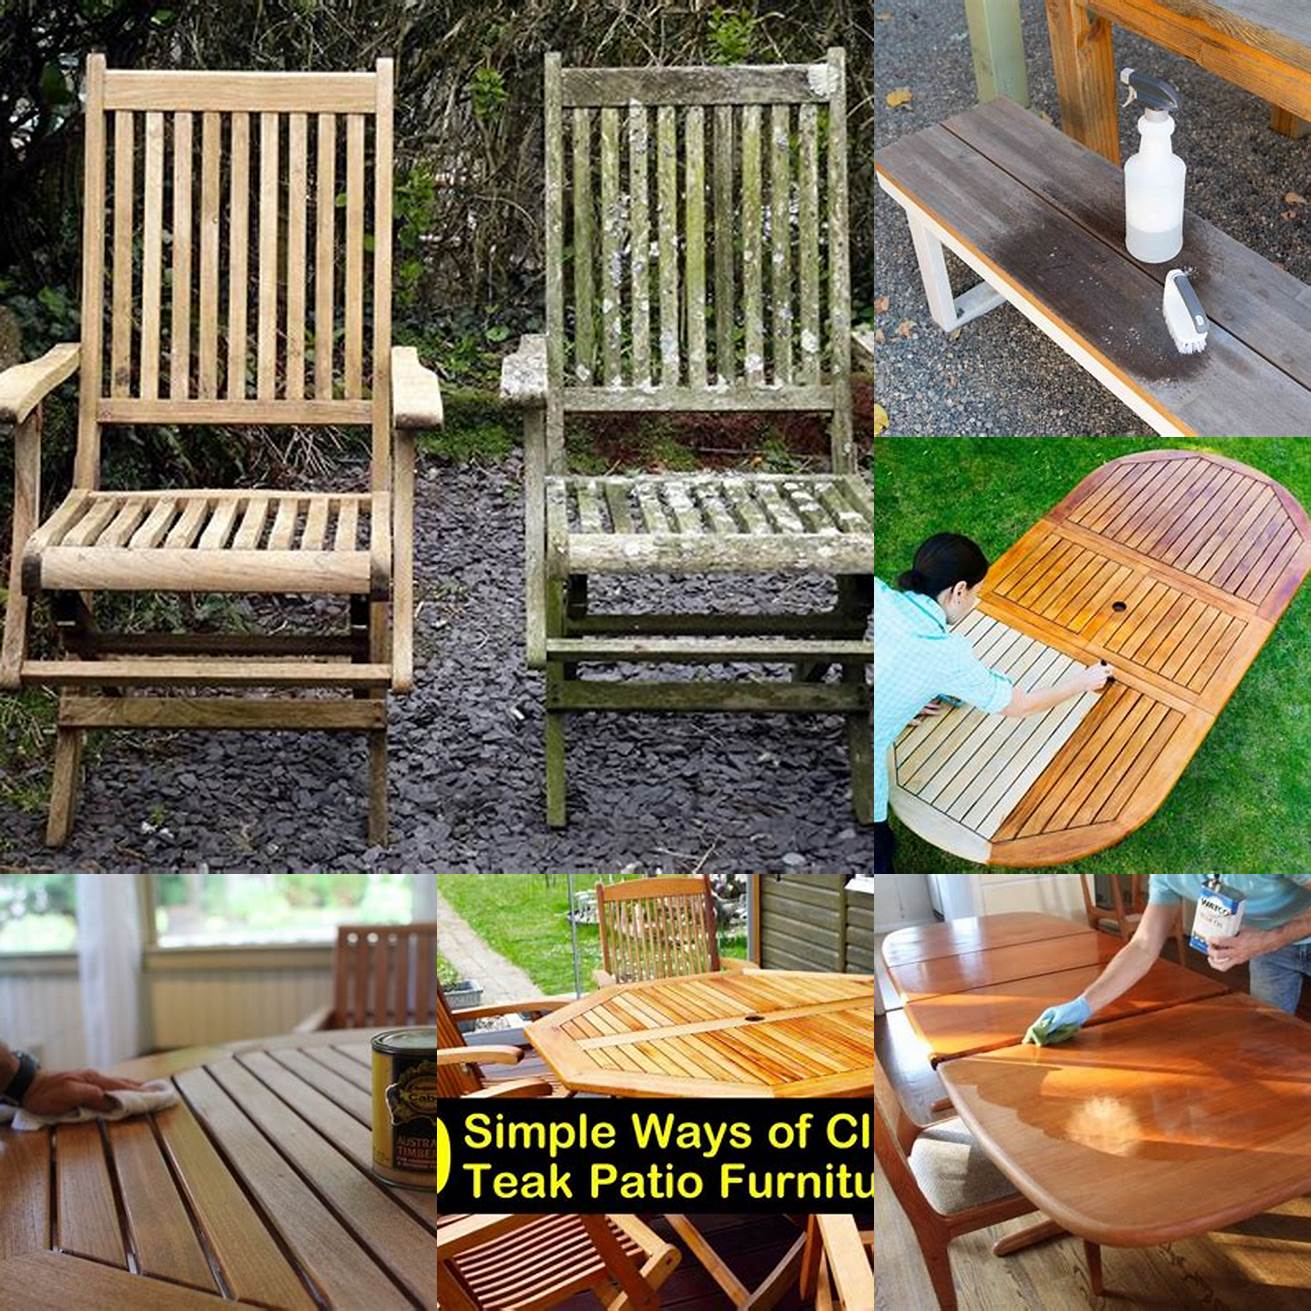 Cleaning and Prepping Your Teak Furniture